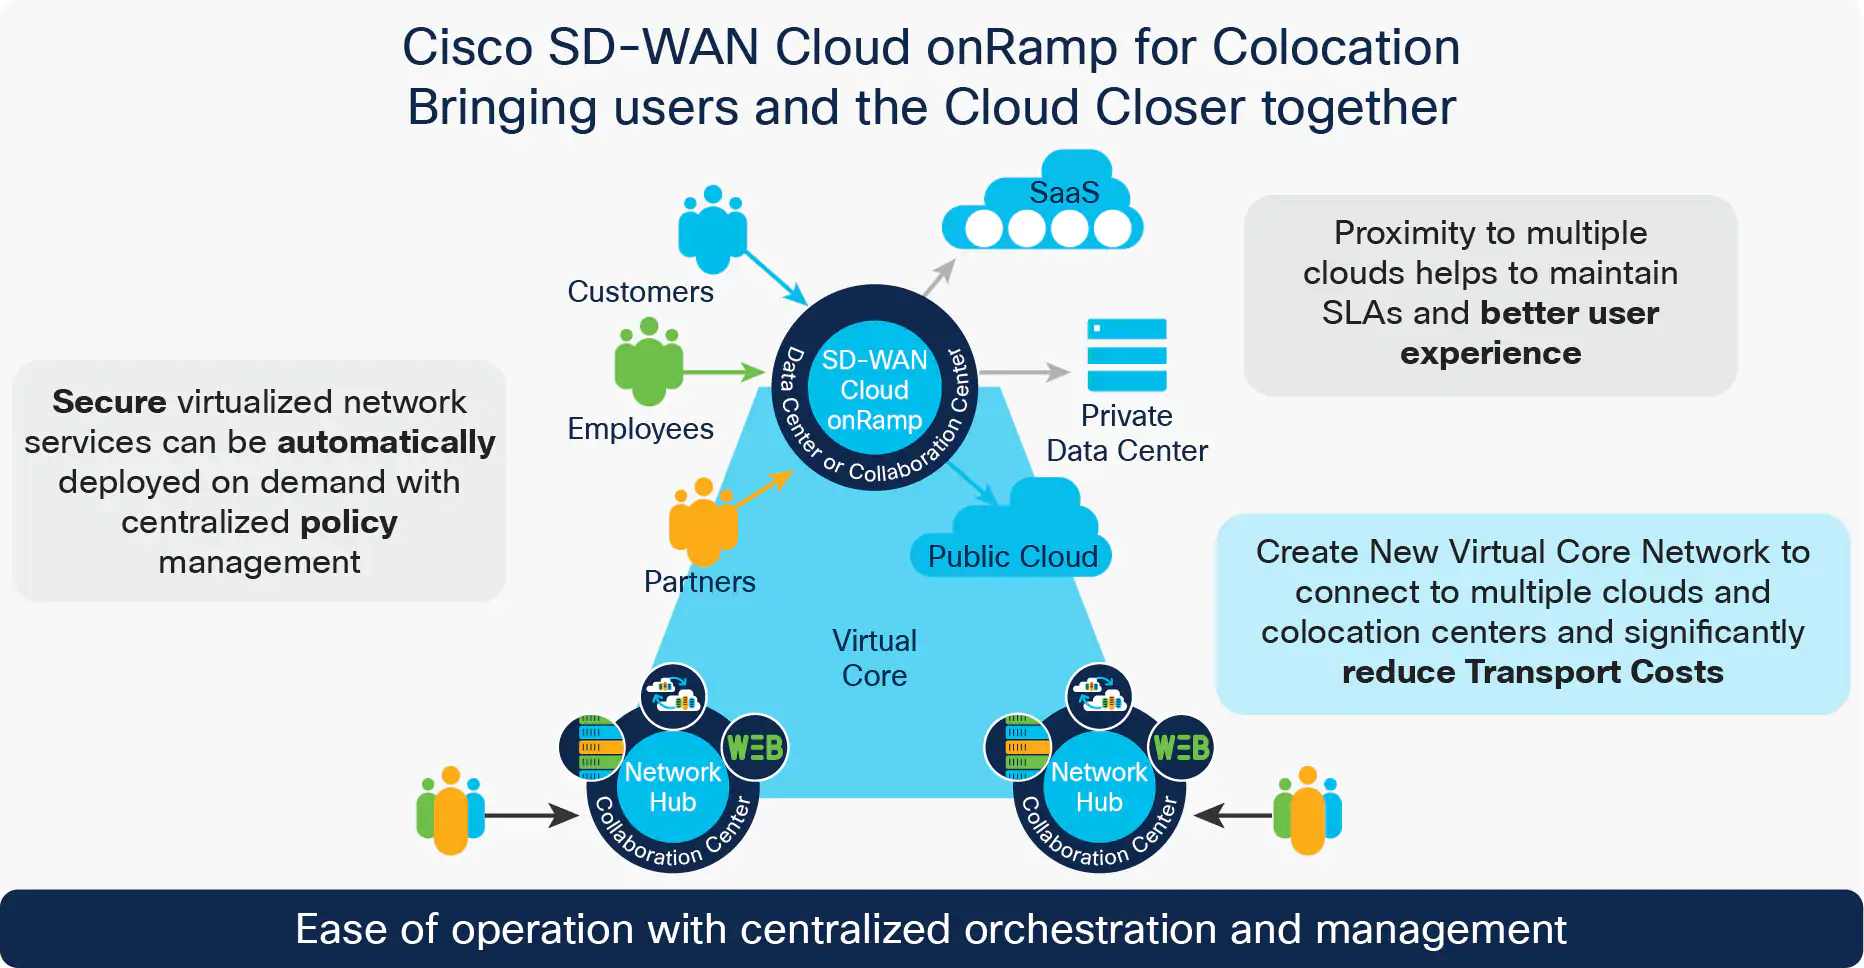 Cloud OnRamp for colocation benefits image